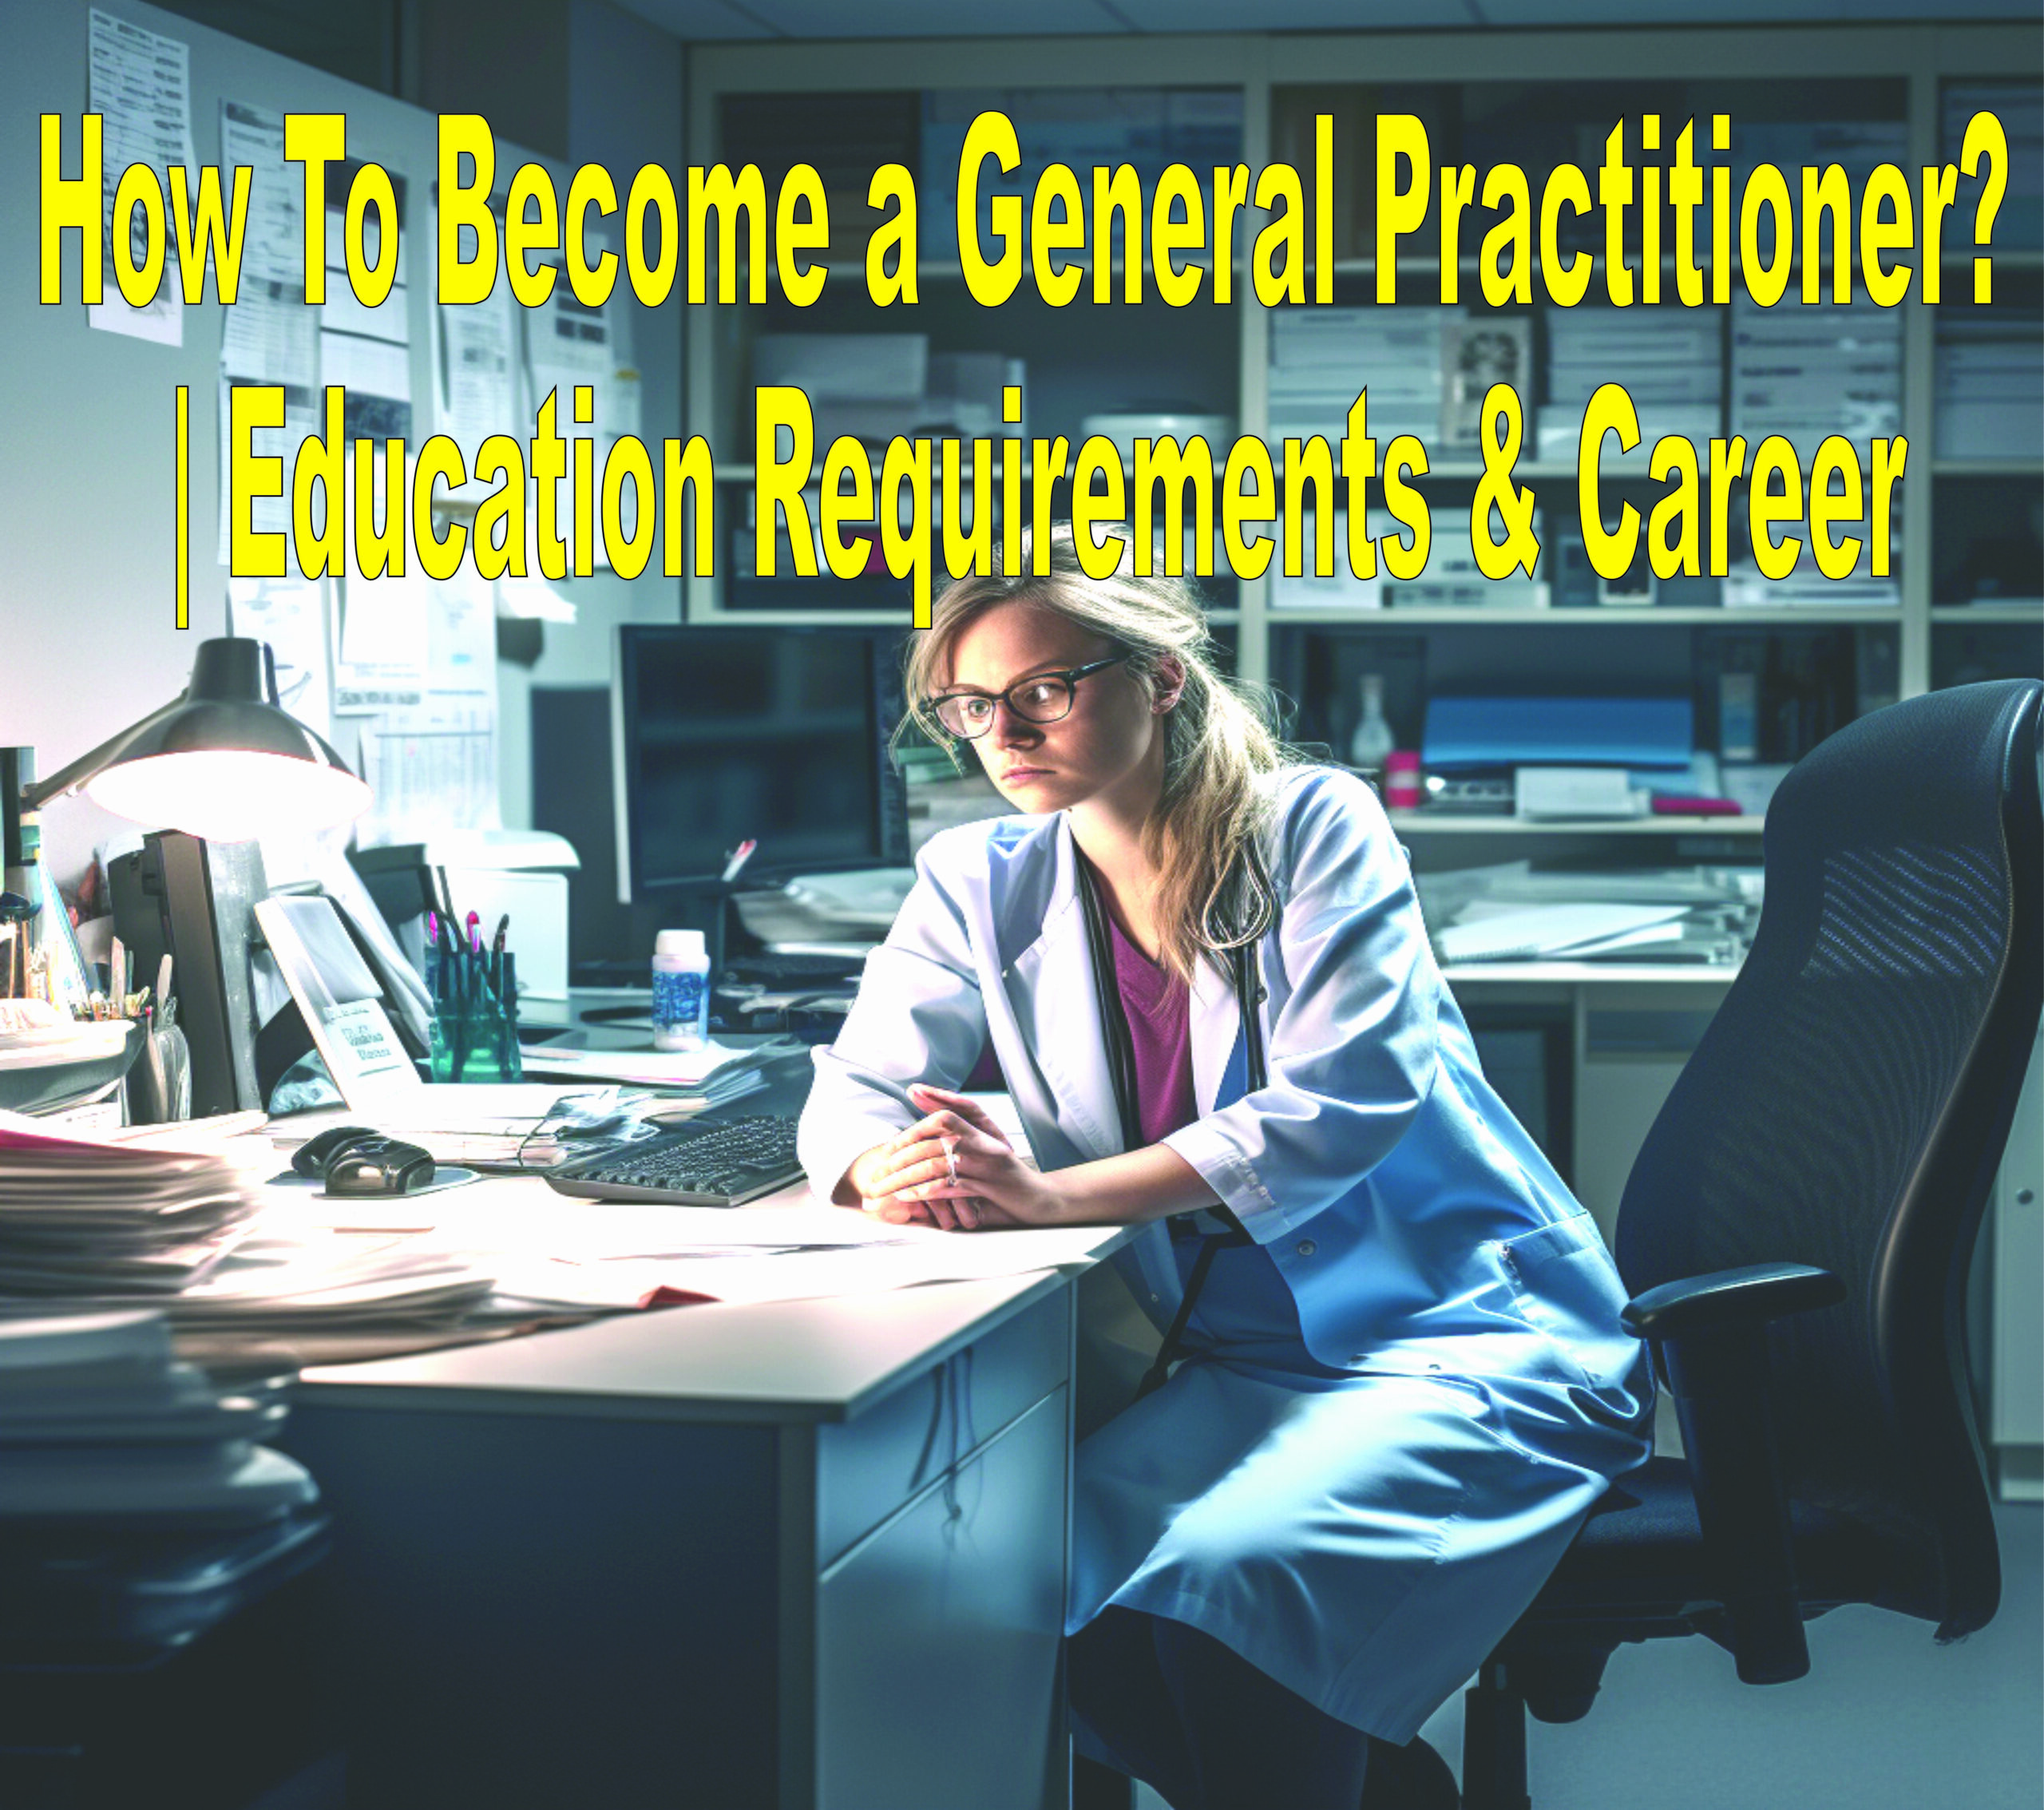 How To Become A General Practitioner Education Requirements & Career